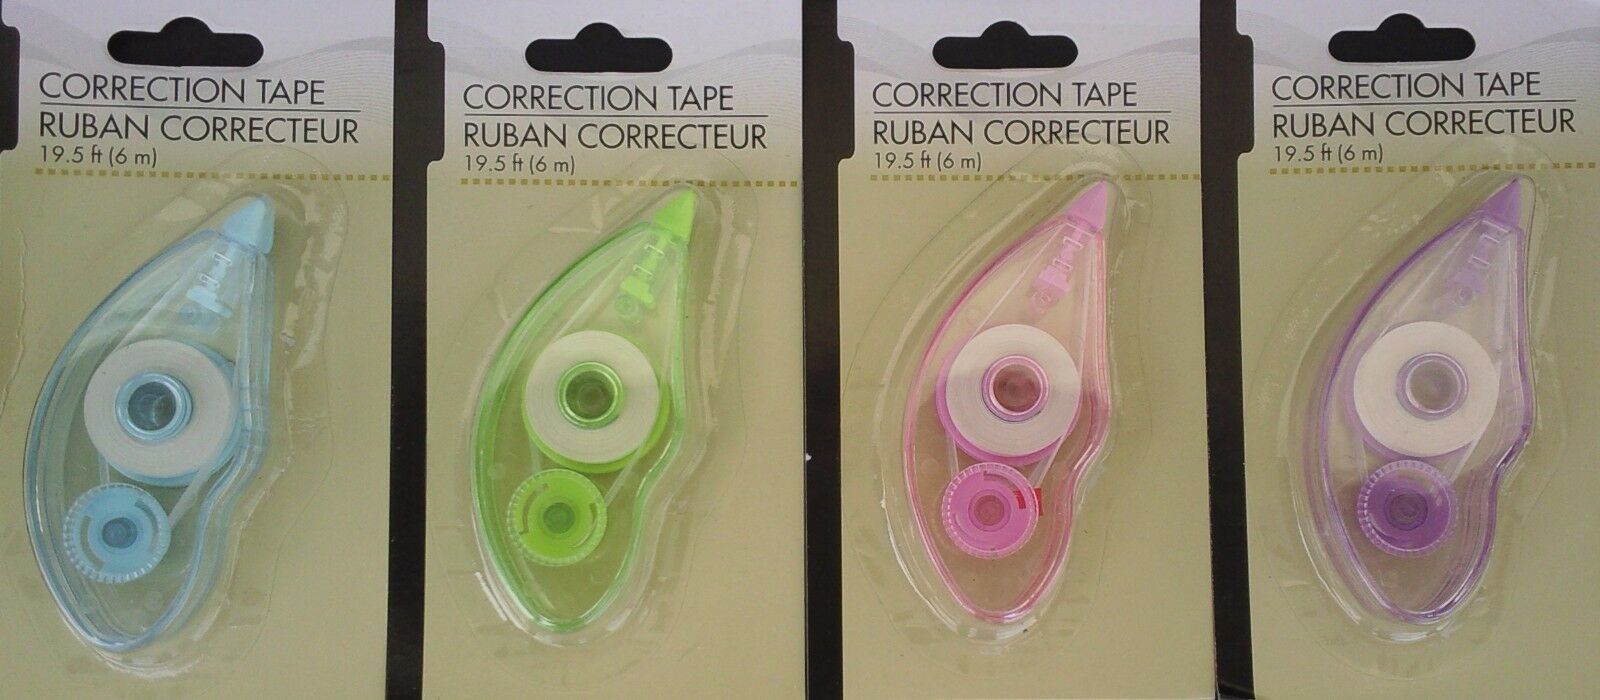 CORRECTION TAPE 19.5 FT (6 M) White-Out, SELECT: Blue, Green, Pink or Purple - $2.99